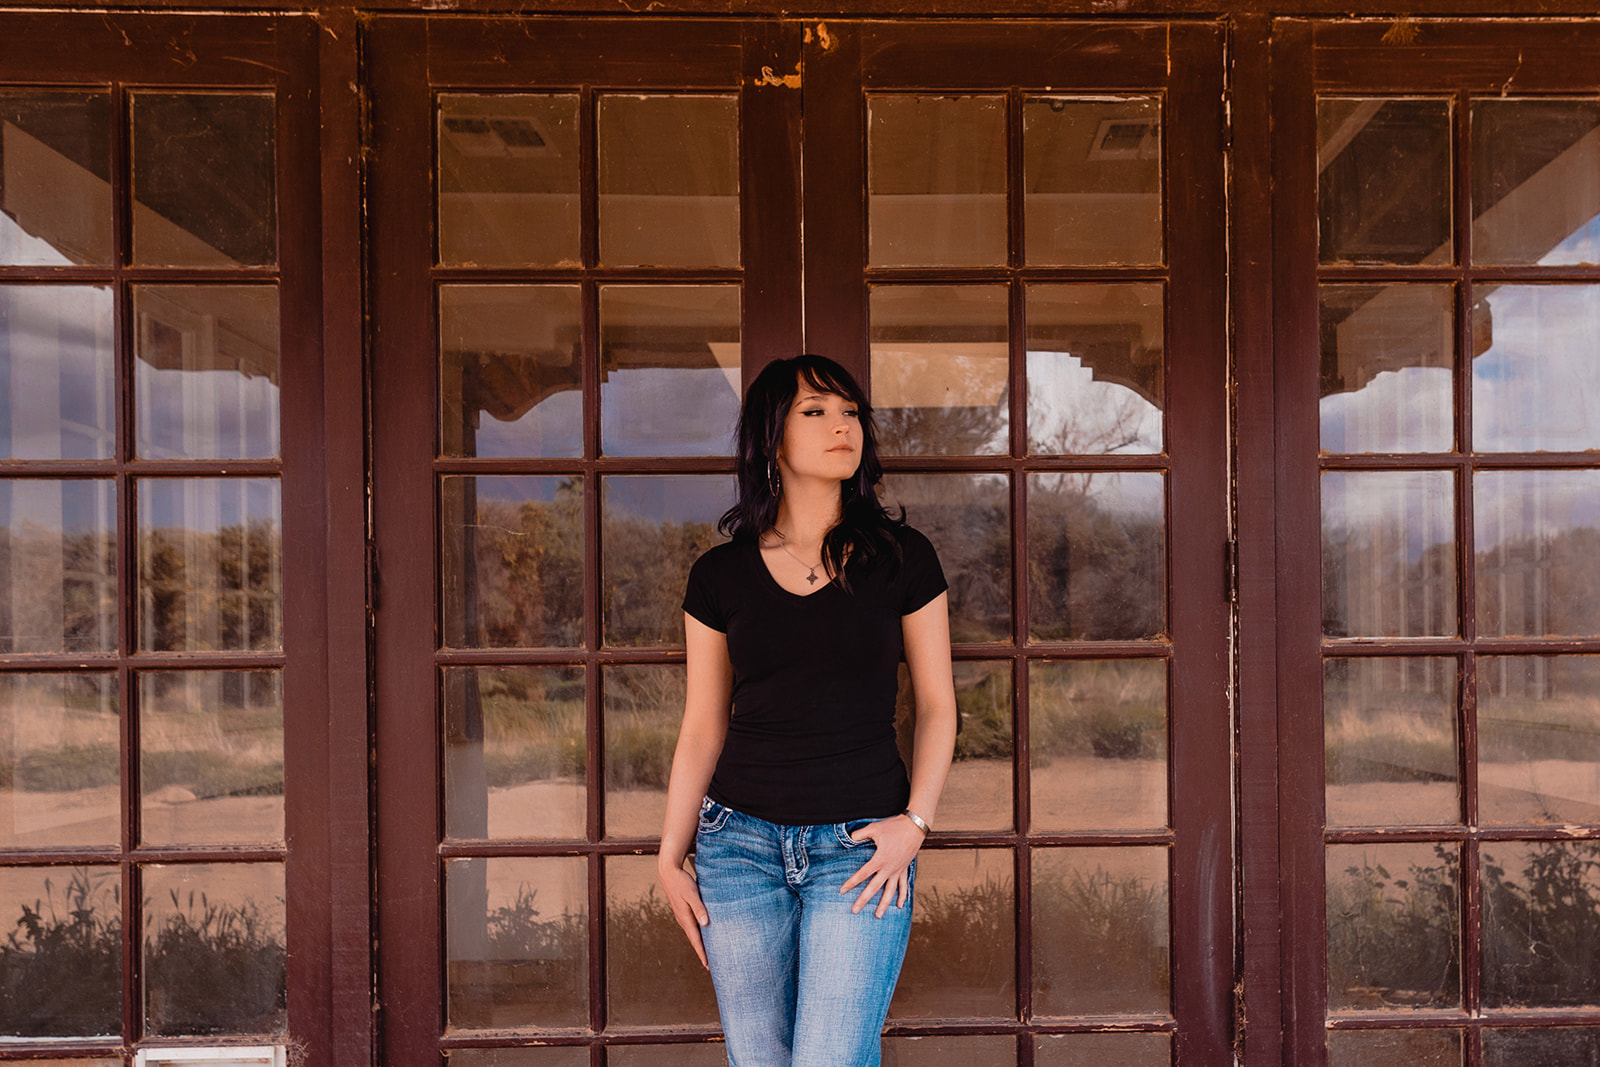 Senior Session In front of an Old horse stable Entrance.